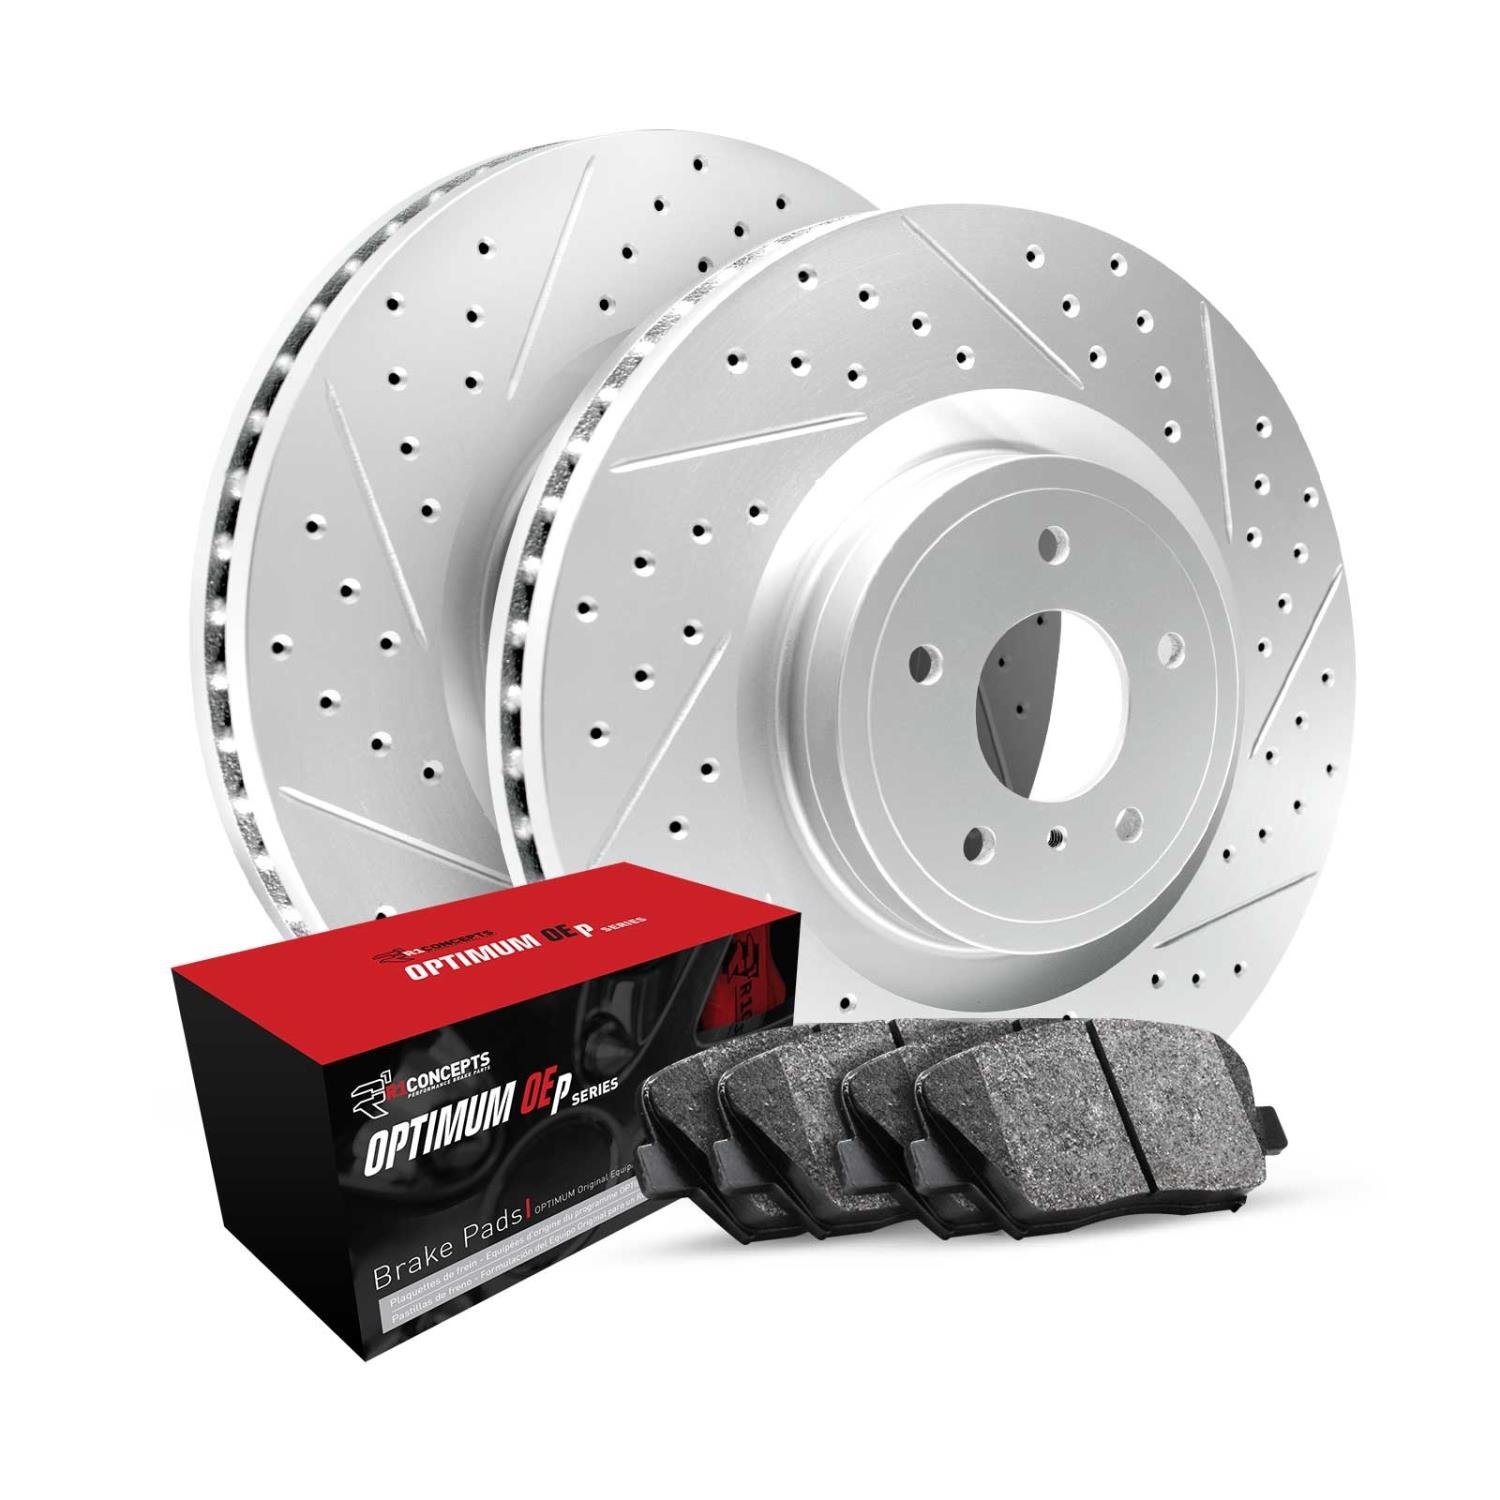 GEO-Carbon Drilled & Slotted Brake Rotor Set w/Optimum OE Pads, Fits Select Fits Multiple Makes/Models, Position: Front & Rear